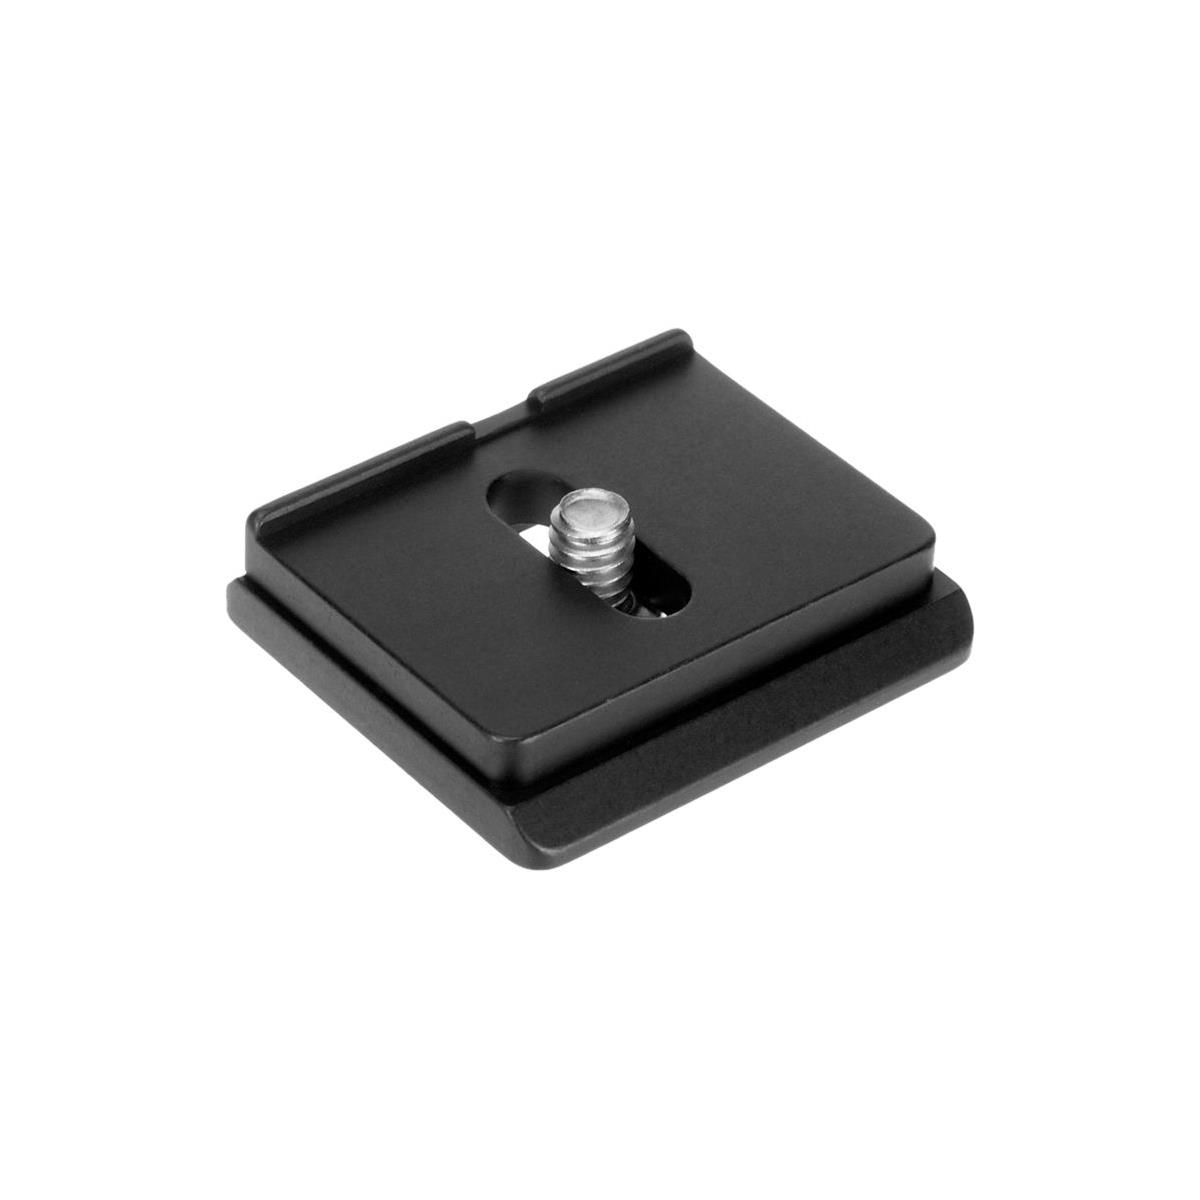 Image of Acratech Quick Release Plate for Olympus OM-D E-M10 Camera